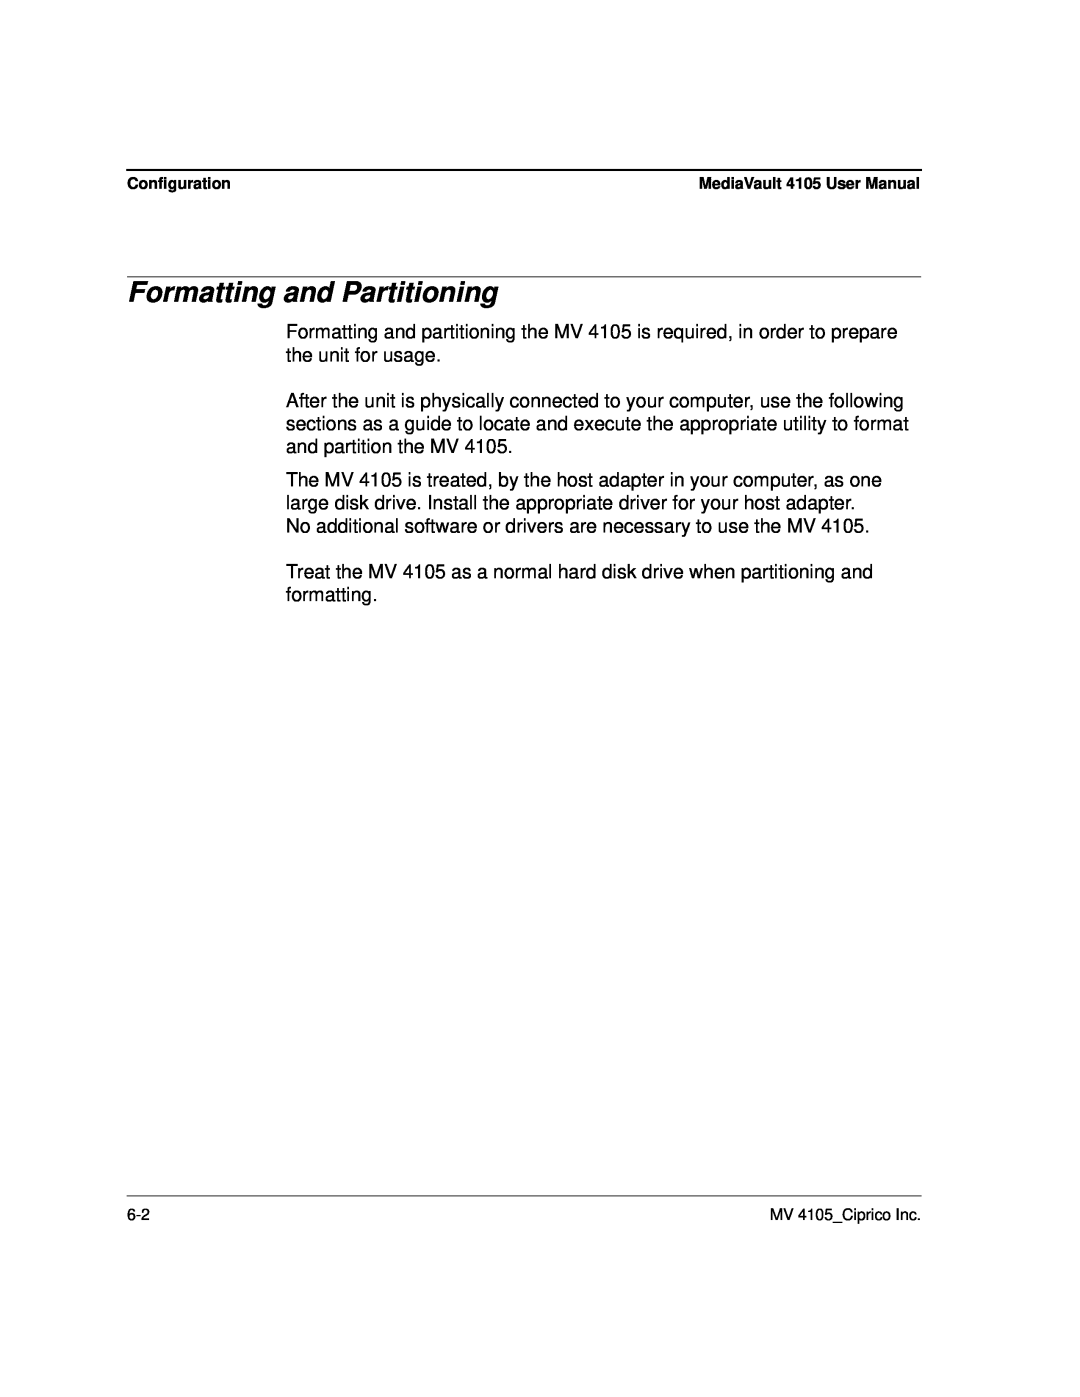 Ciprico 4105 Series user manual Formatting and Partitioning, Configuration 